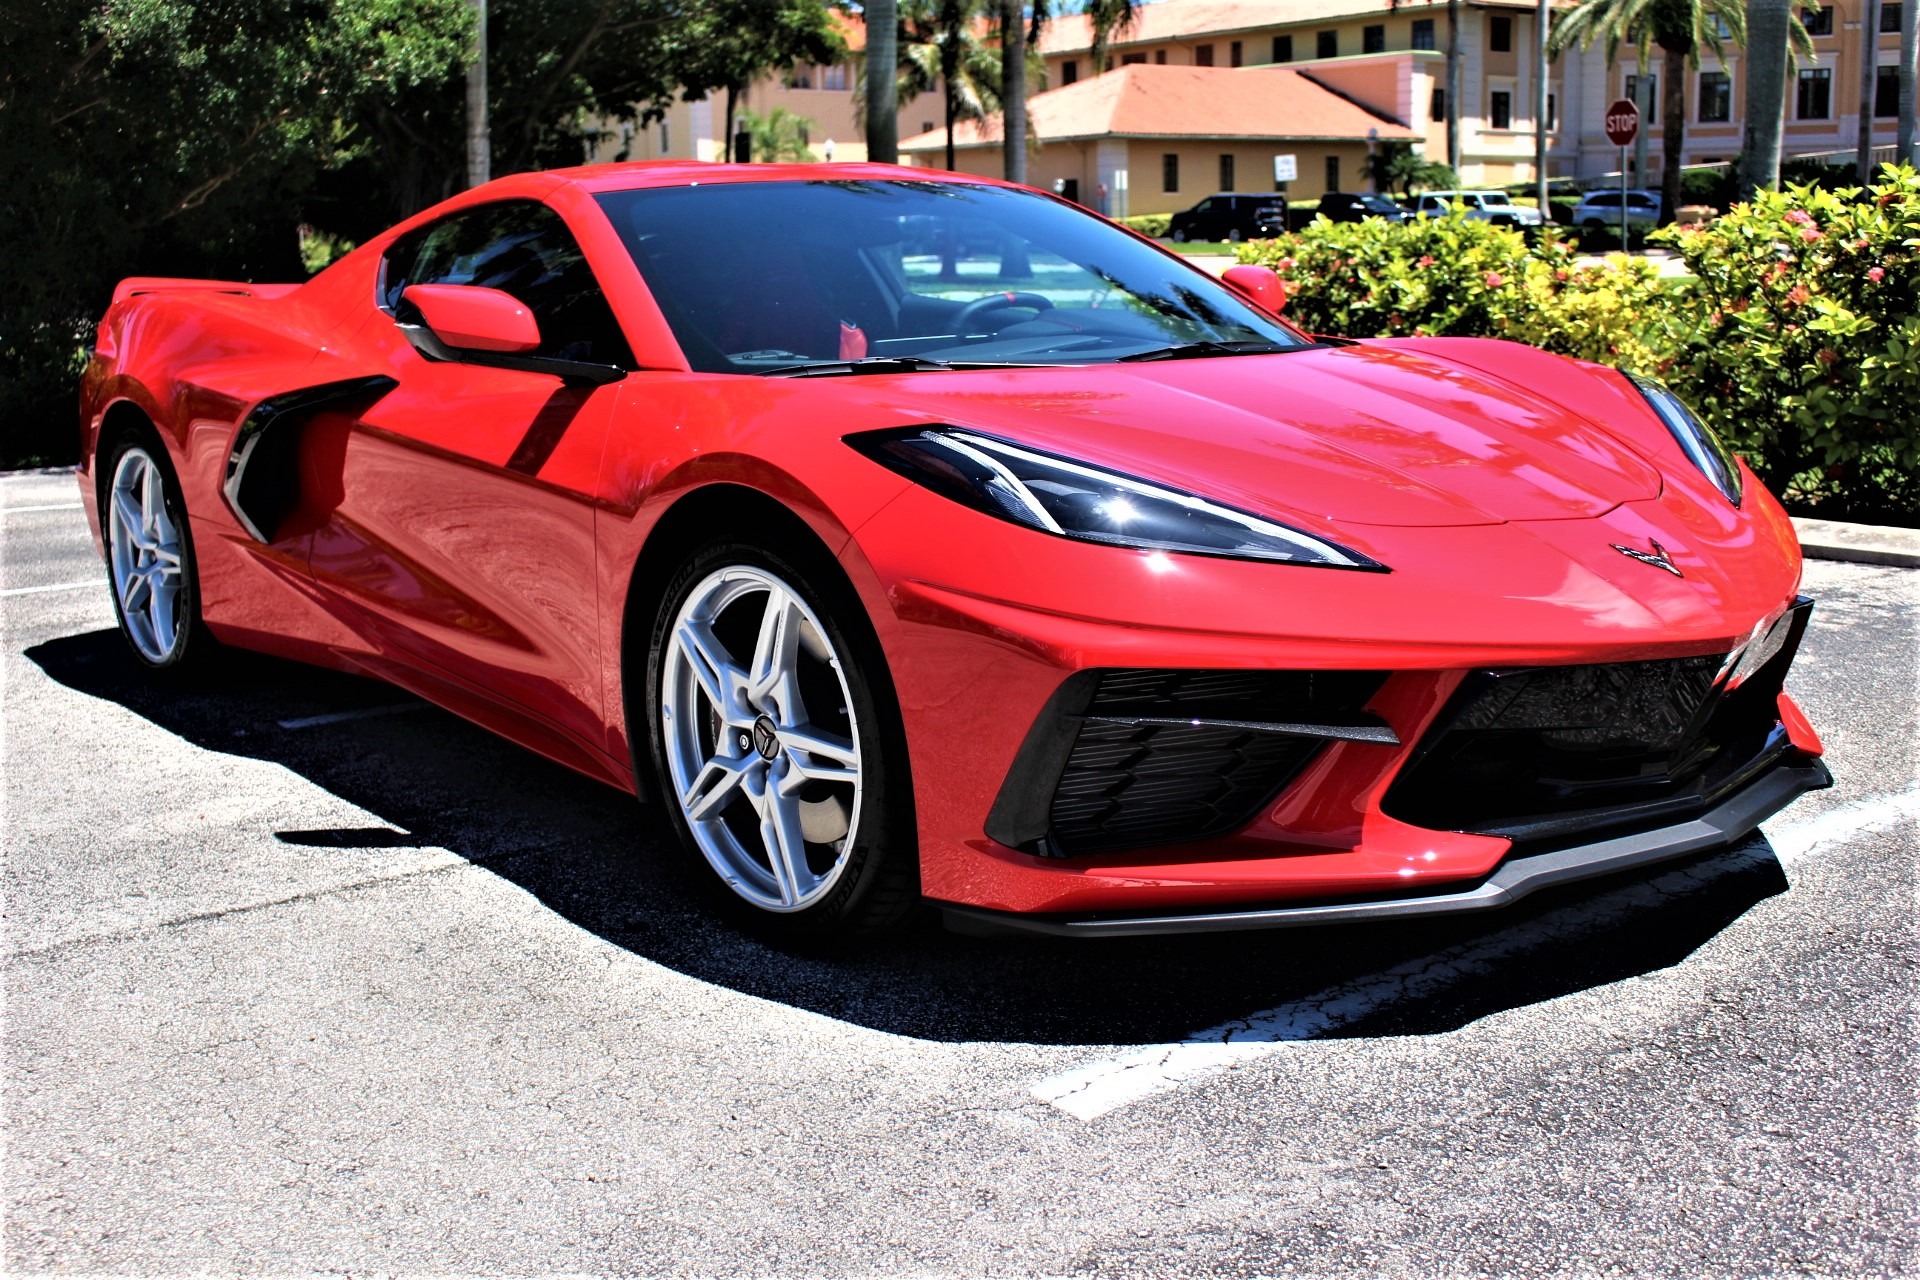 Used 2021 Chevrolet Corvette Stingray for sale Sold at The Gables Sports Cars in Miami FL 33146 3